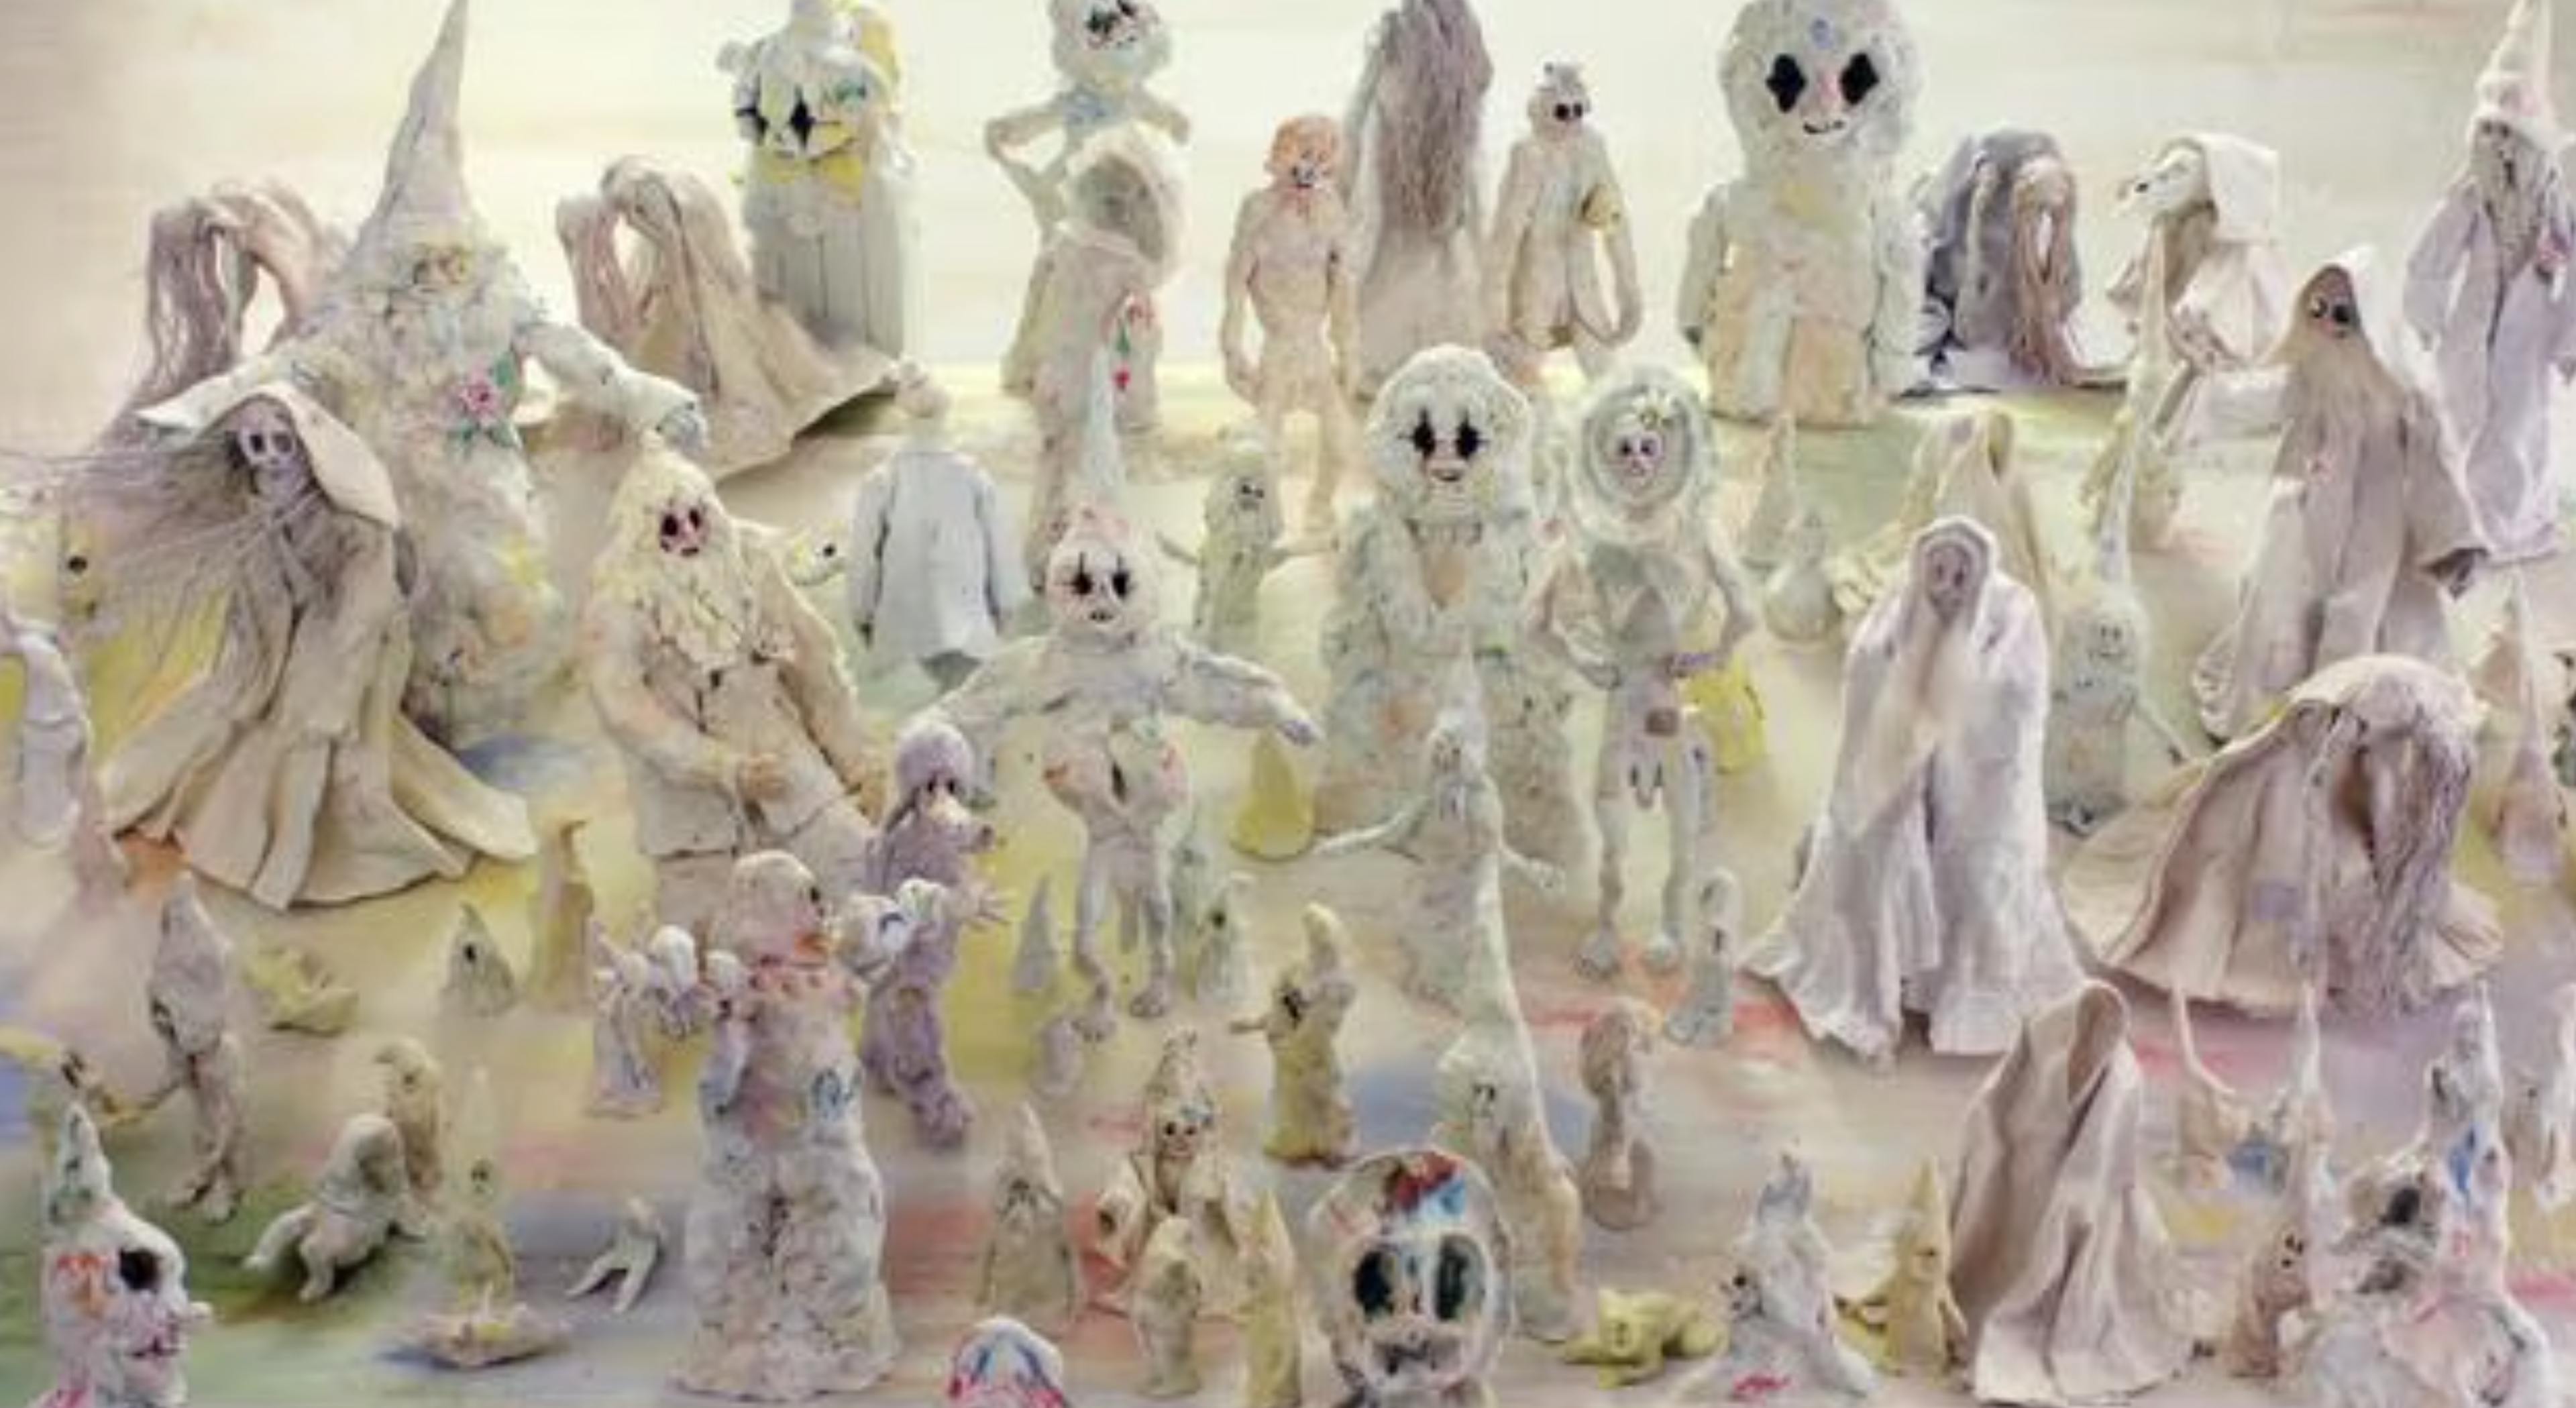 Image of a crowd of figures out of clay, with big eyes and cloaks looking at the camera. From Allison Schulnik's Mound (2011)